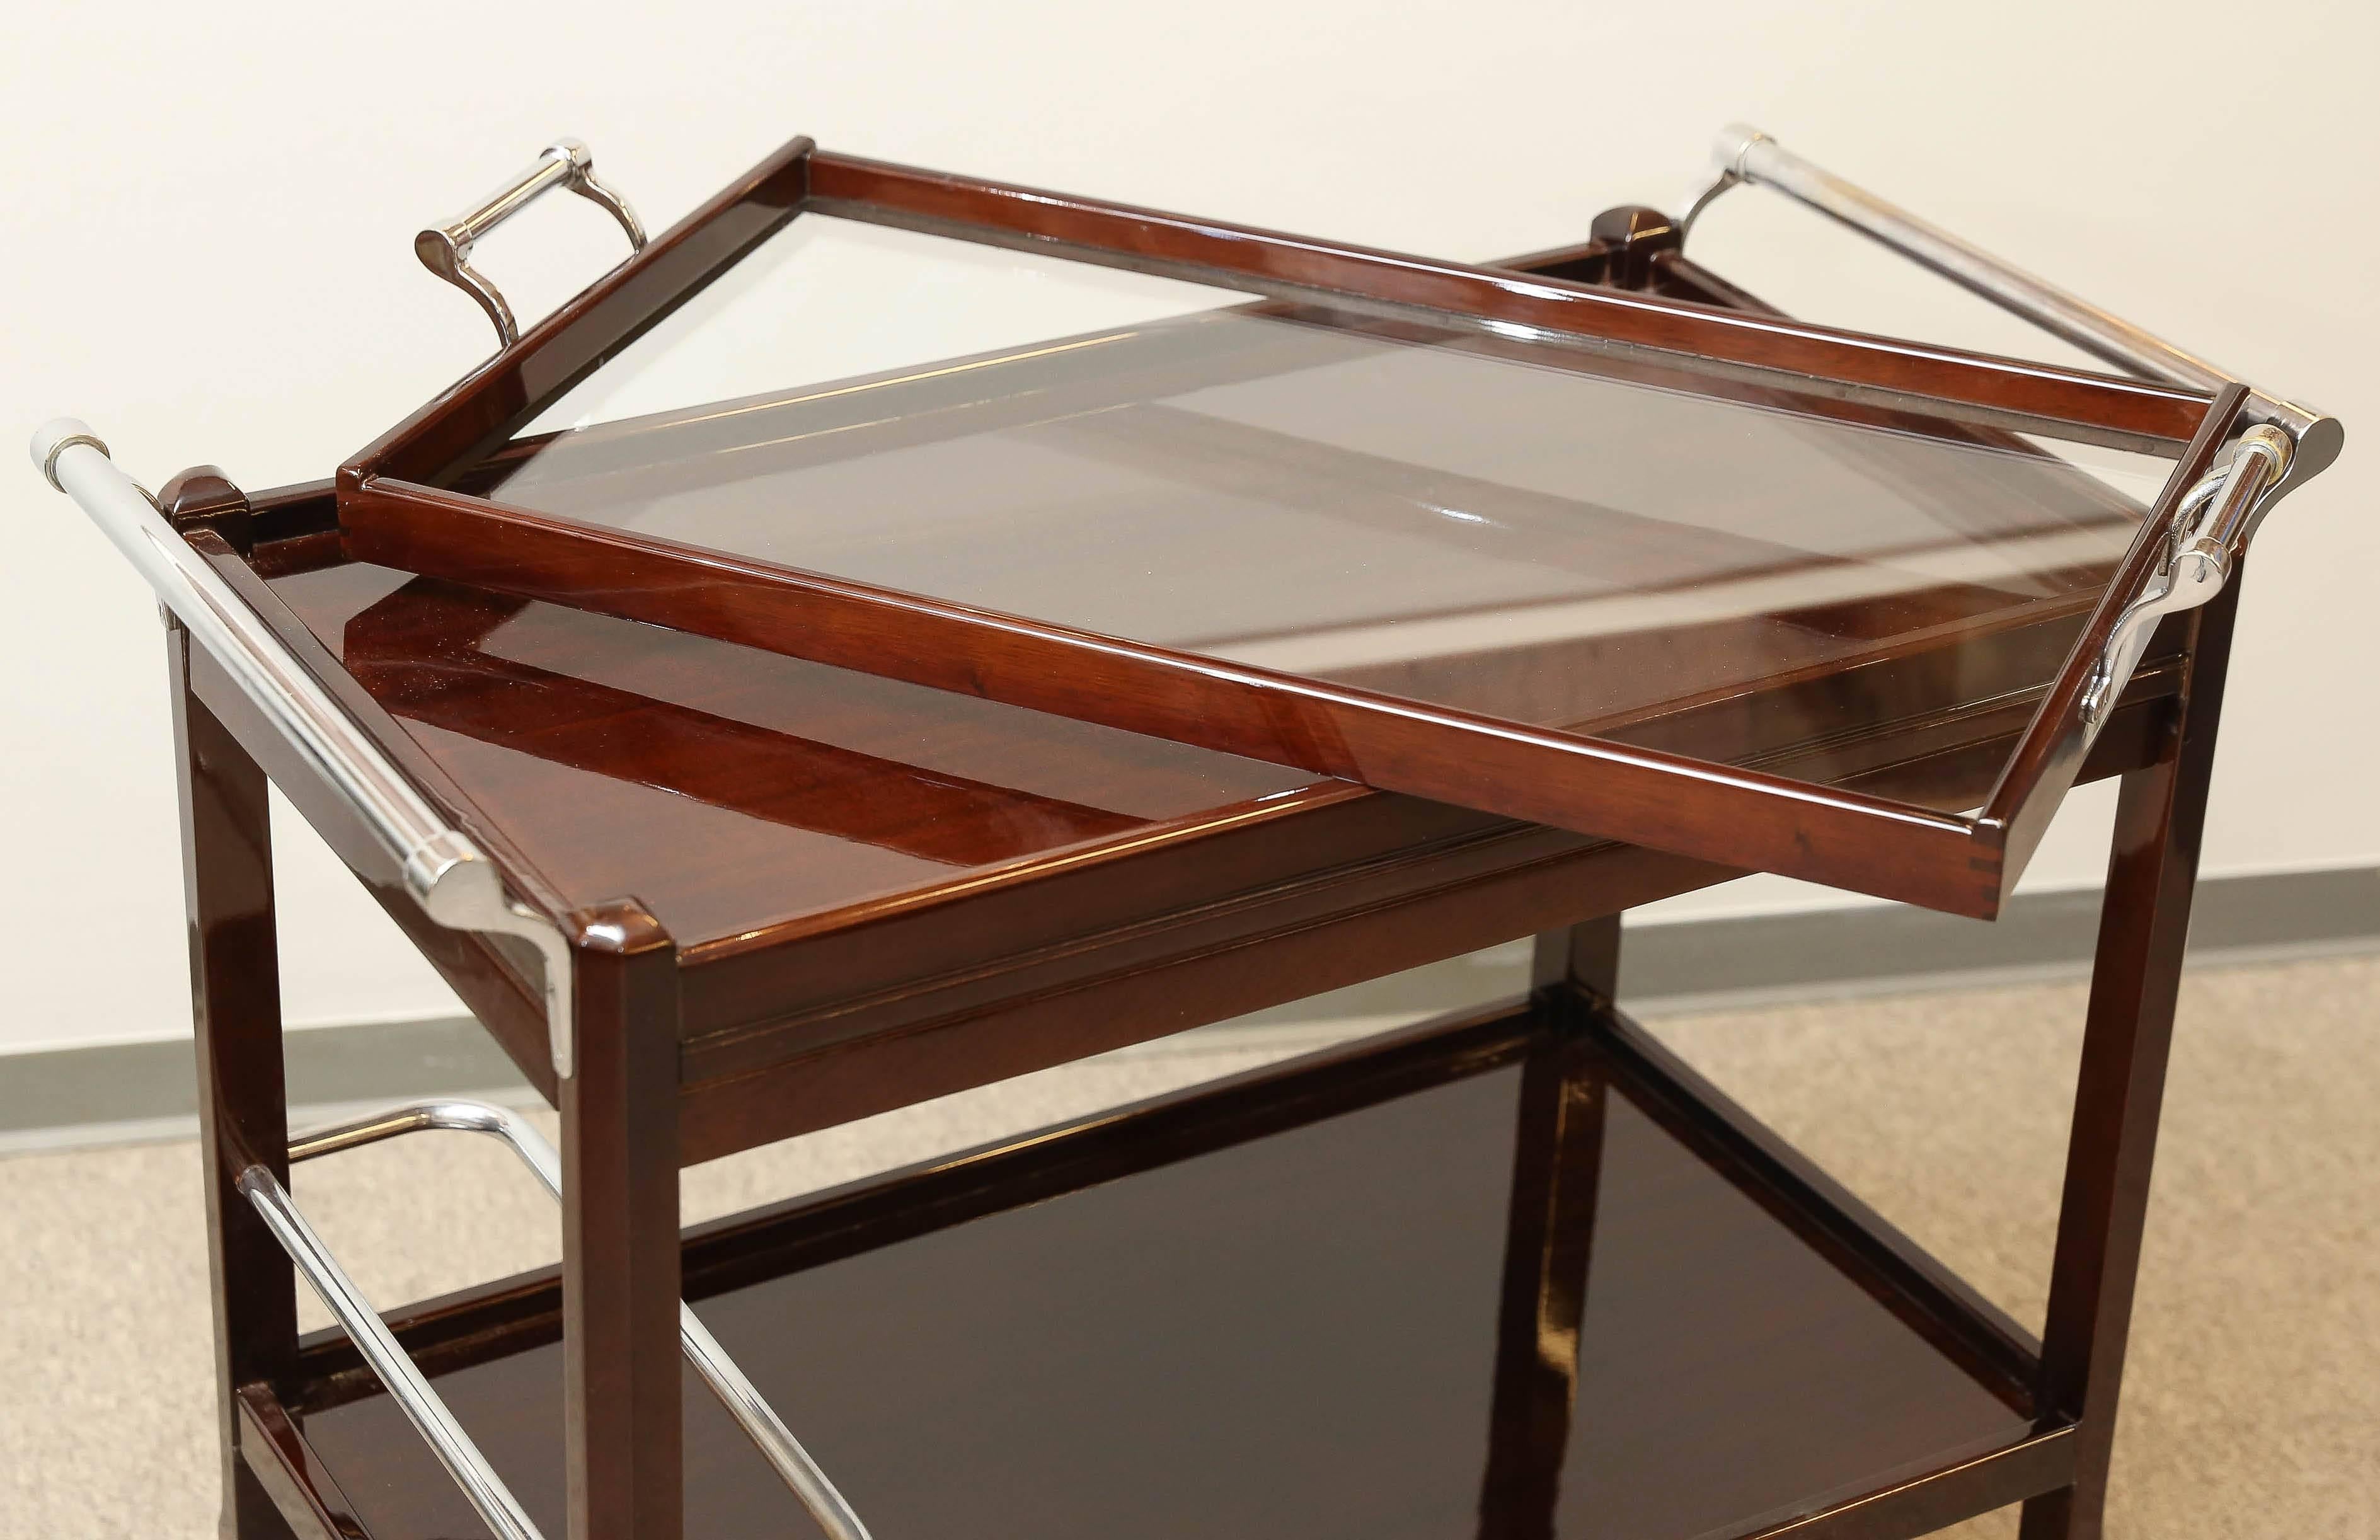 A wooden frame of the bar cart supports two wooden trays. One glass removable tray with small chrome handles is located on the top of the upper shelf. On the bottom, wooden legs are connected with chrome tubes. Four small wheels are attached to the